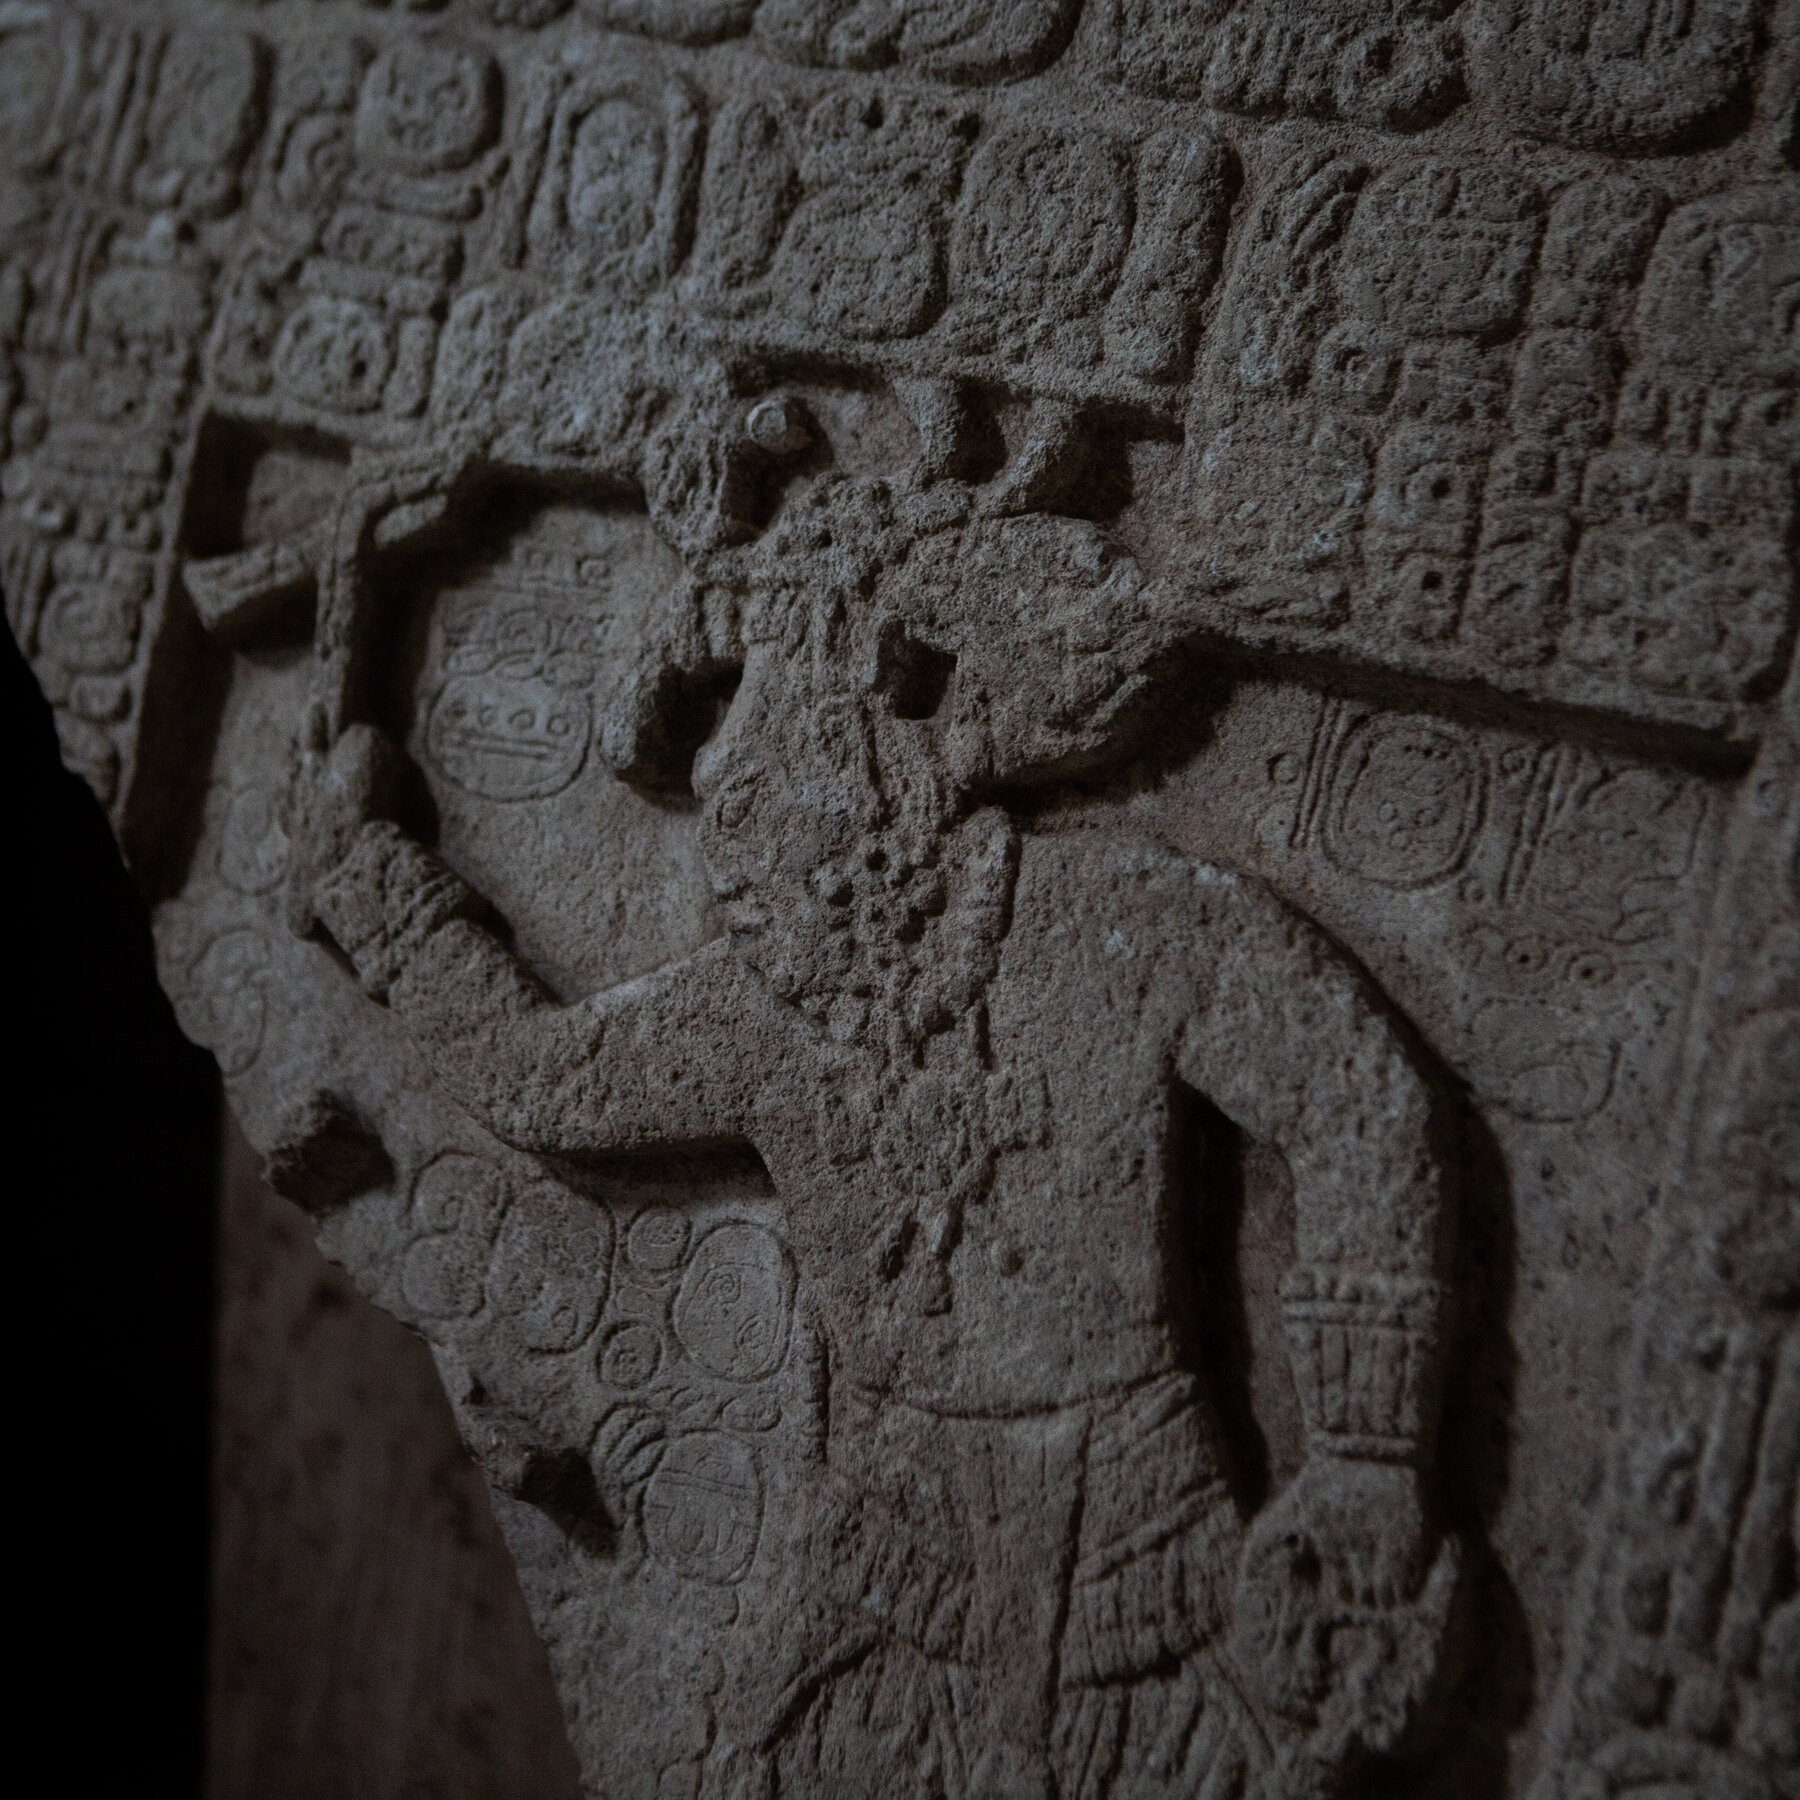 EXCAVATIONS UNCOVER HEADLESS LIFE-SIZE MAYA STATUE